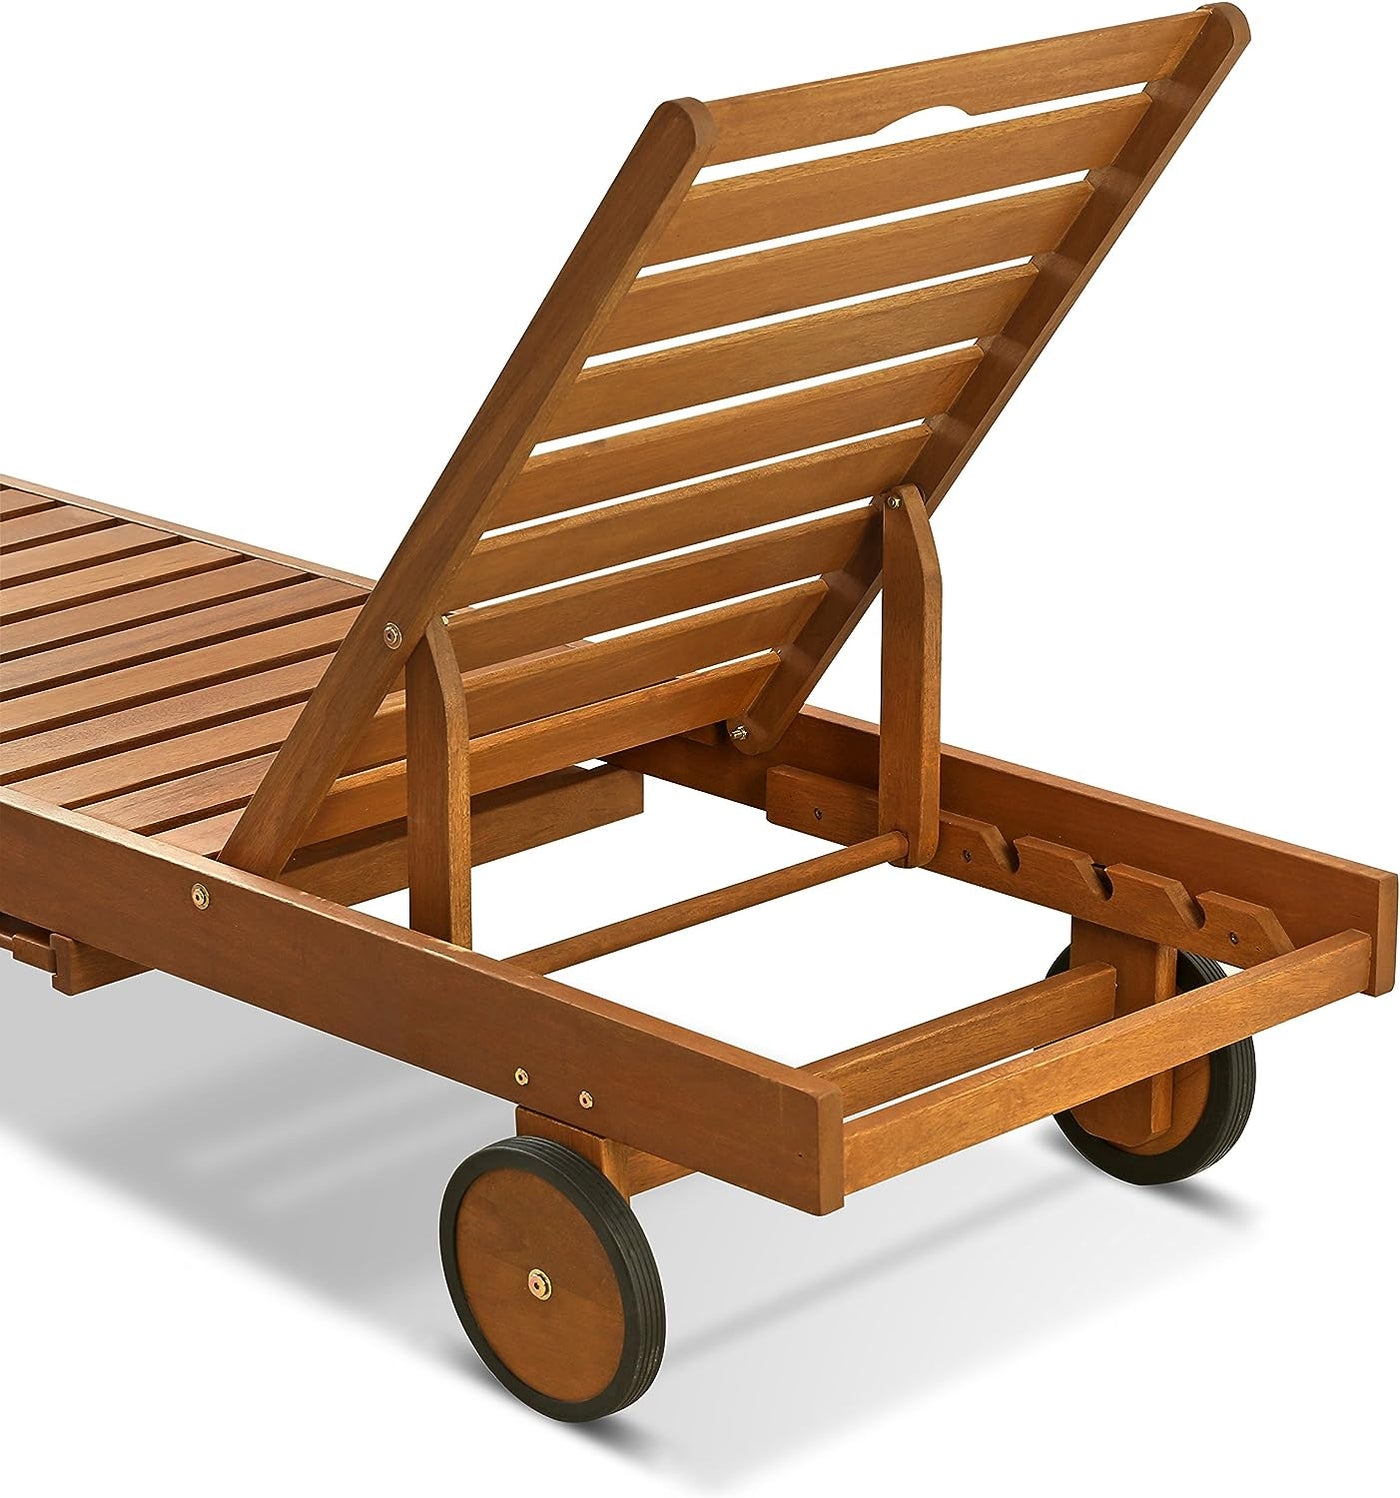 Outdoor Hardwood Patio Furniture Sun Lounger with Tray in Teak Oil, Natural - $110